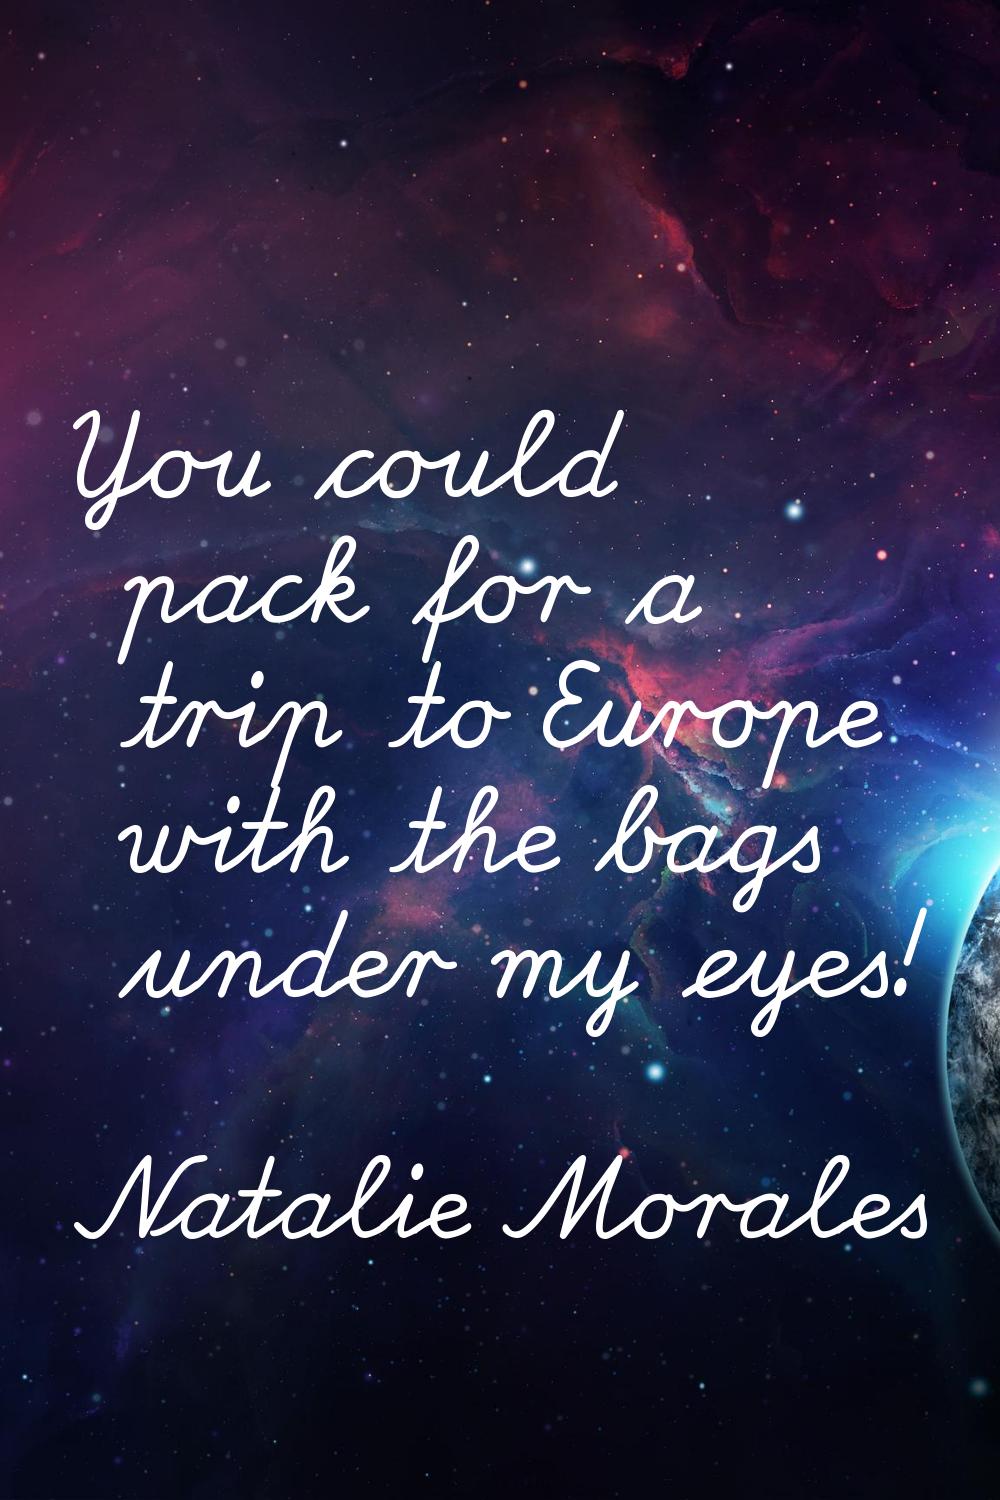 You could pack for a trip to Europe with the bags under my eyes!